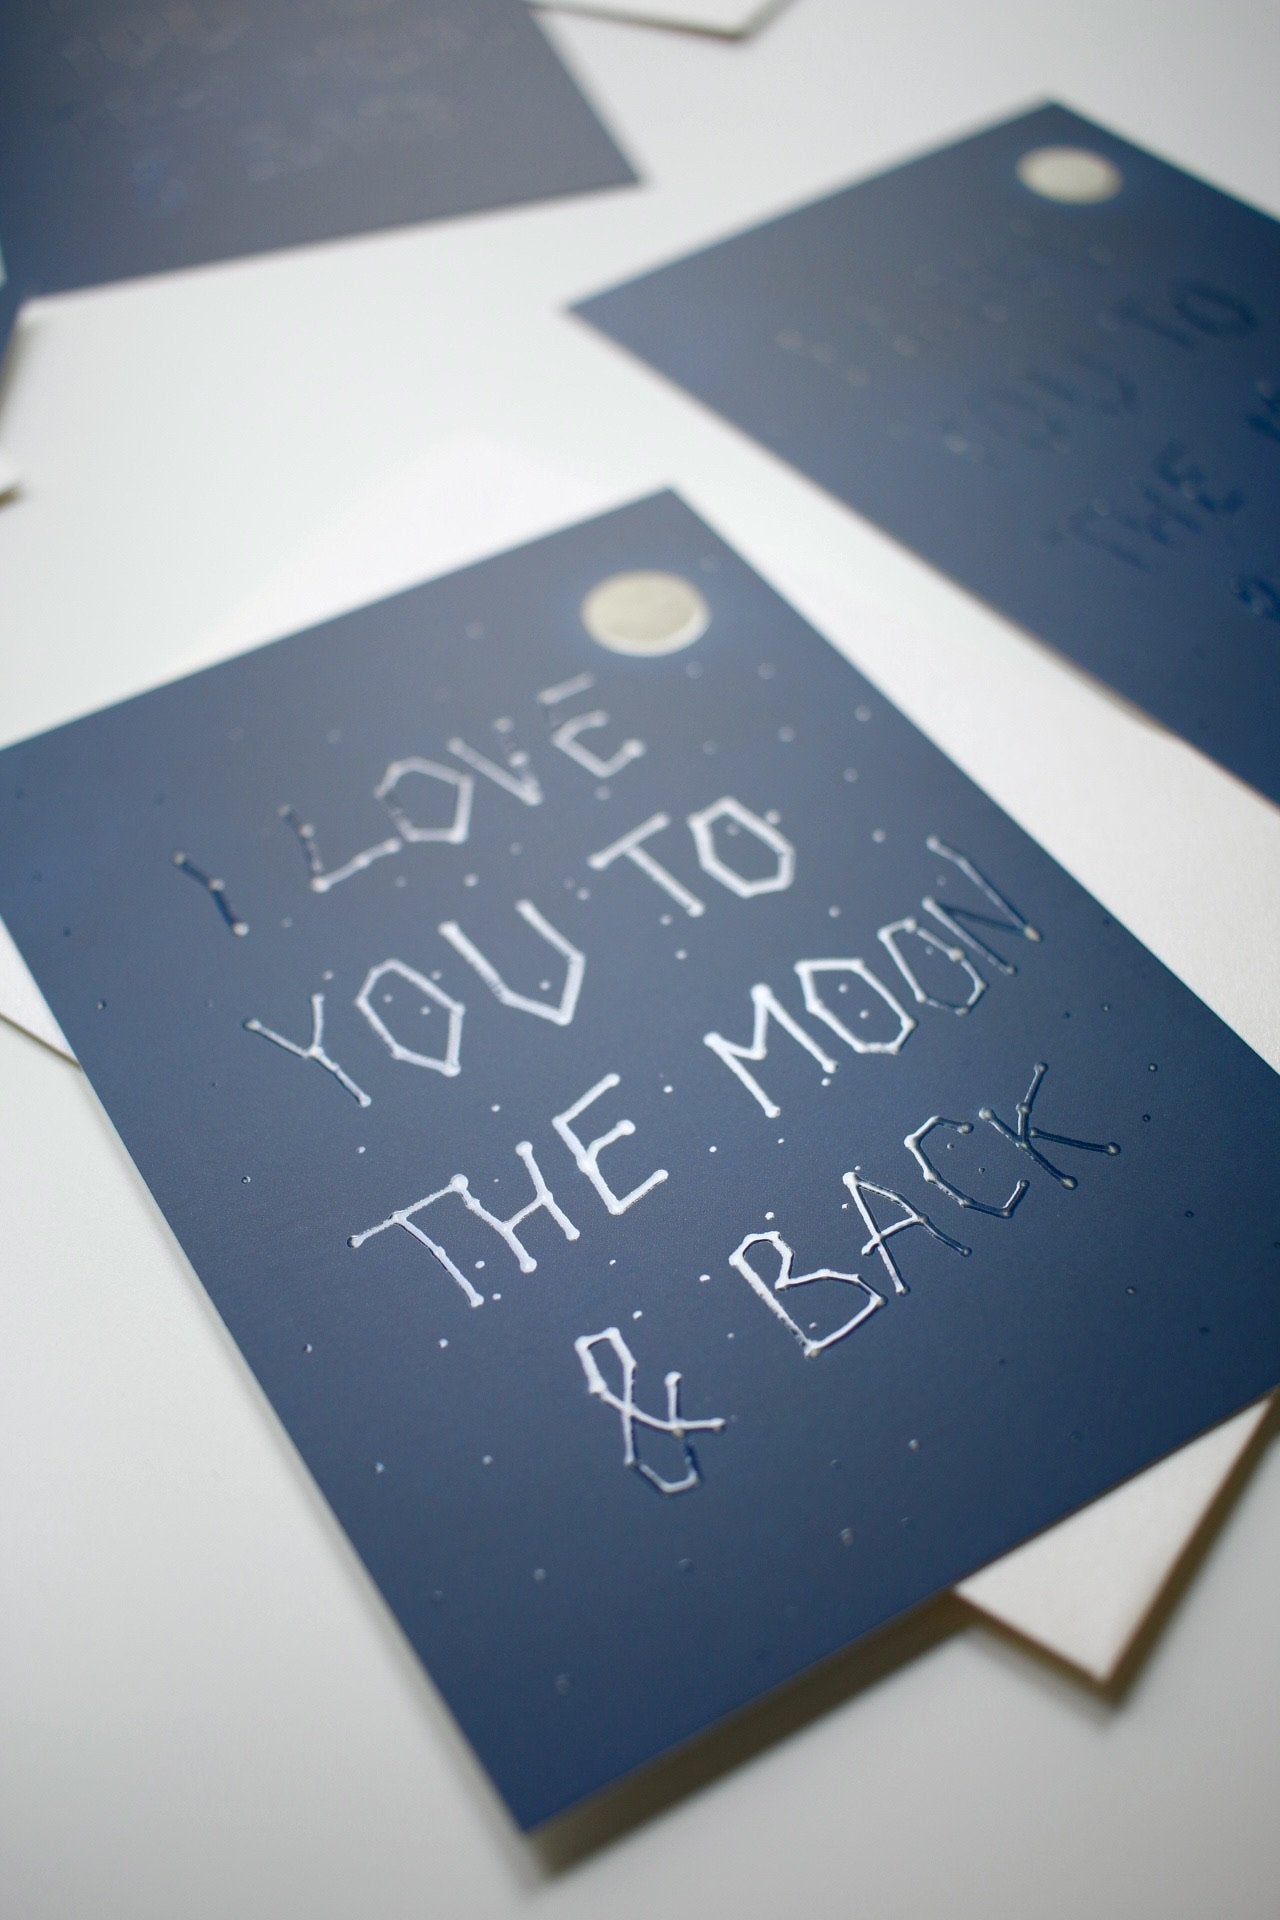 Love You to the Moon and Back Greeting Cards - Honeypress Design